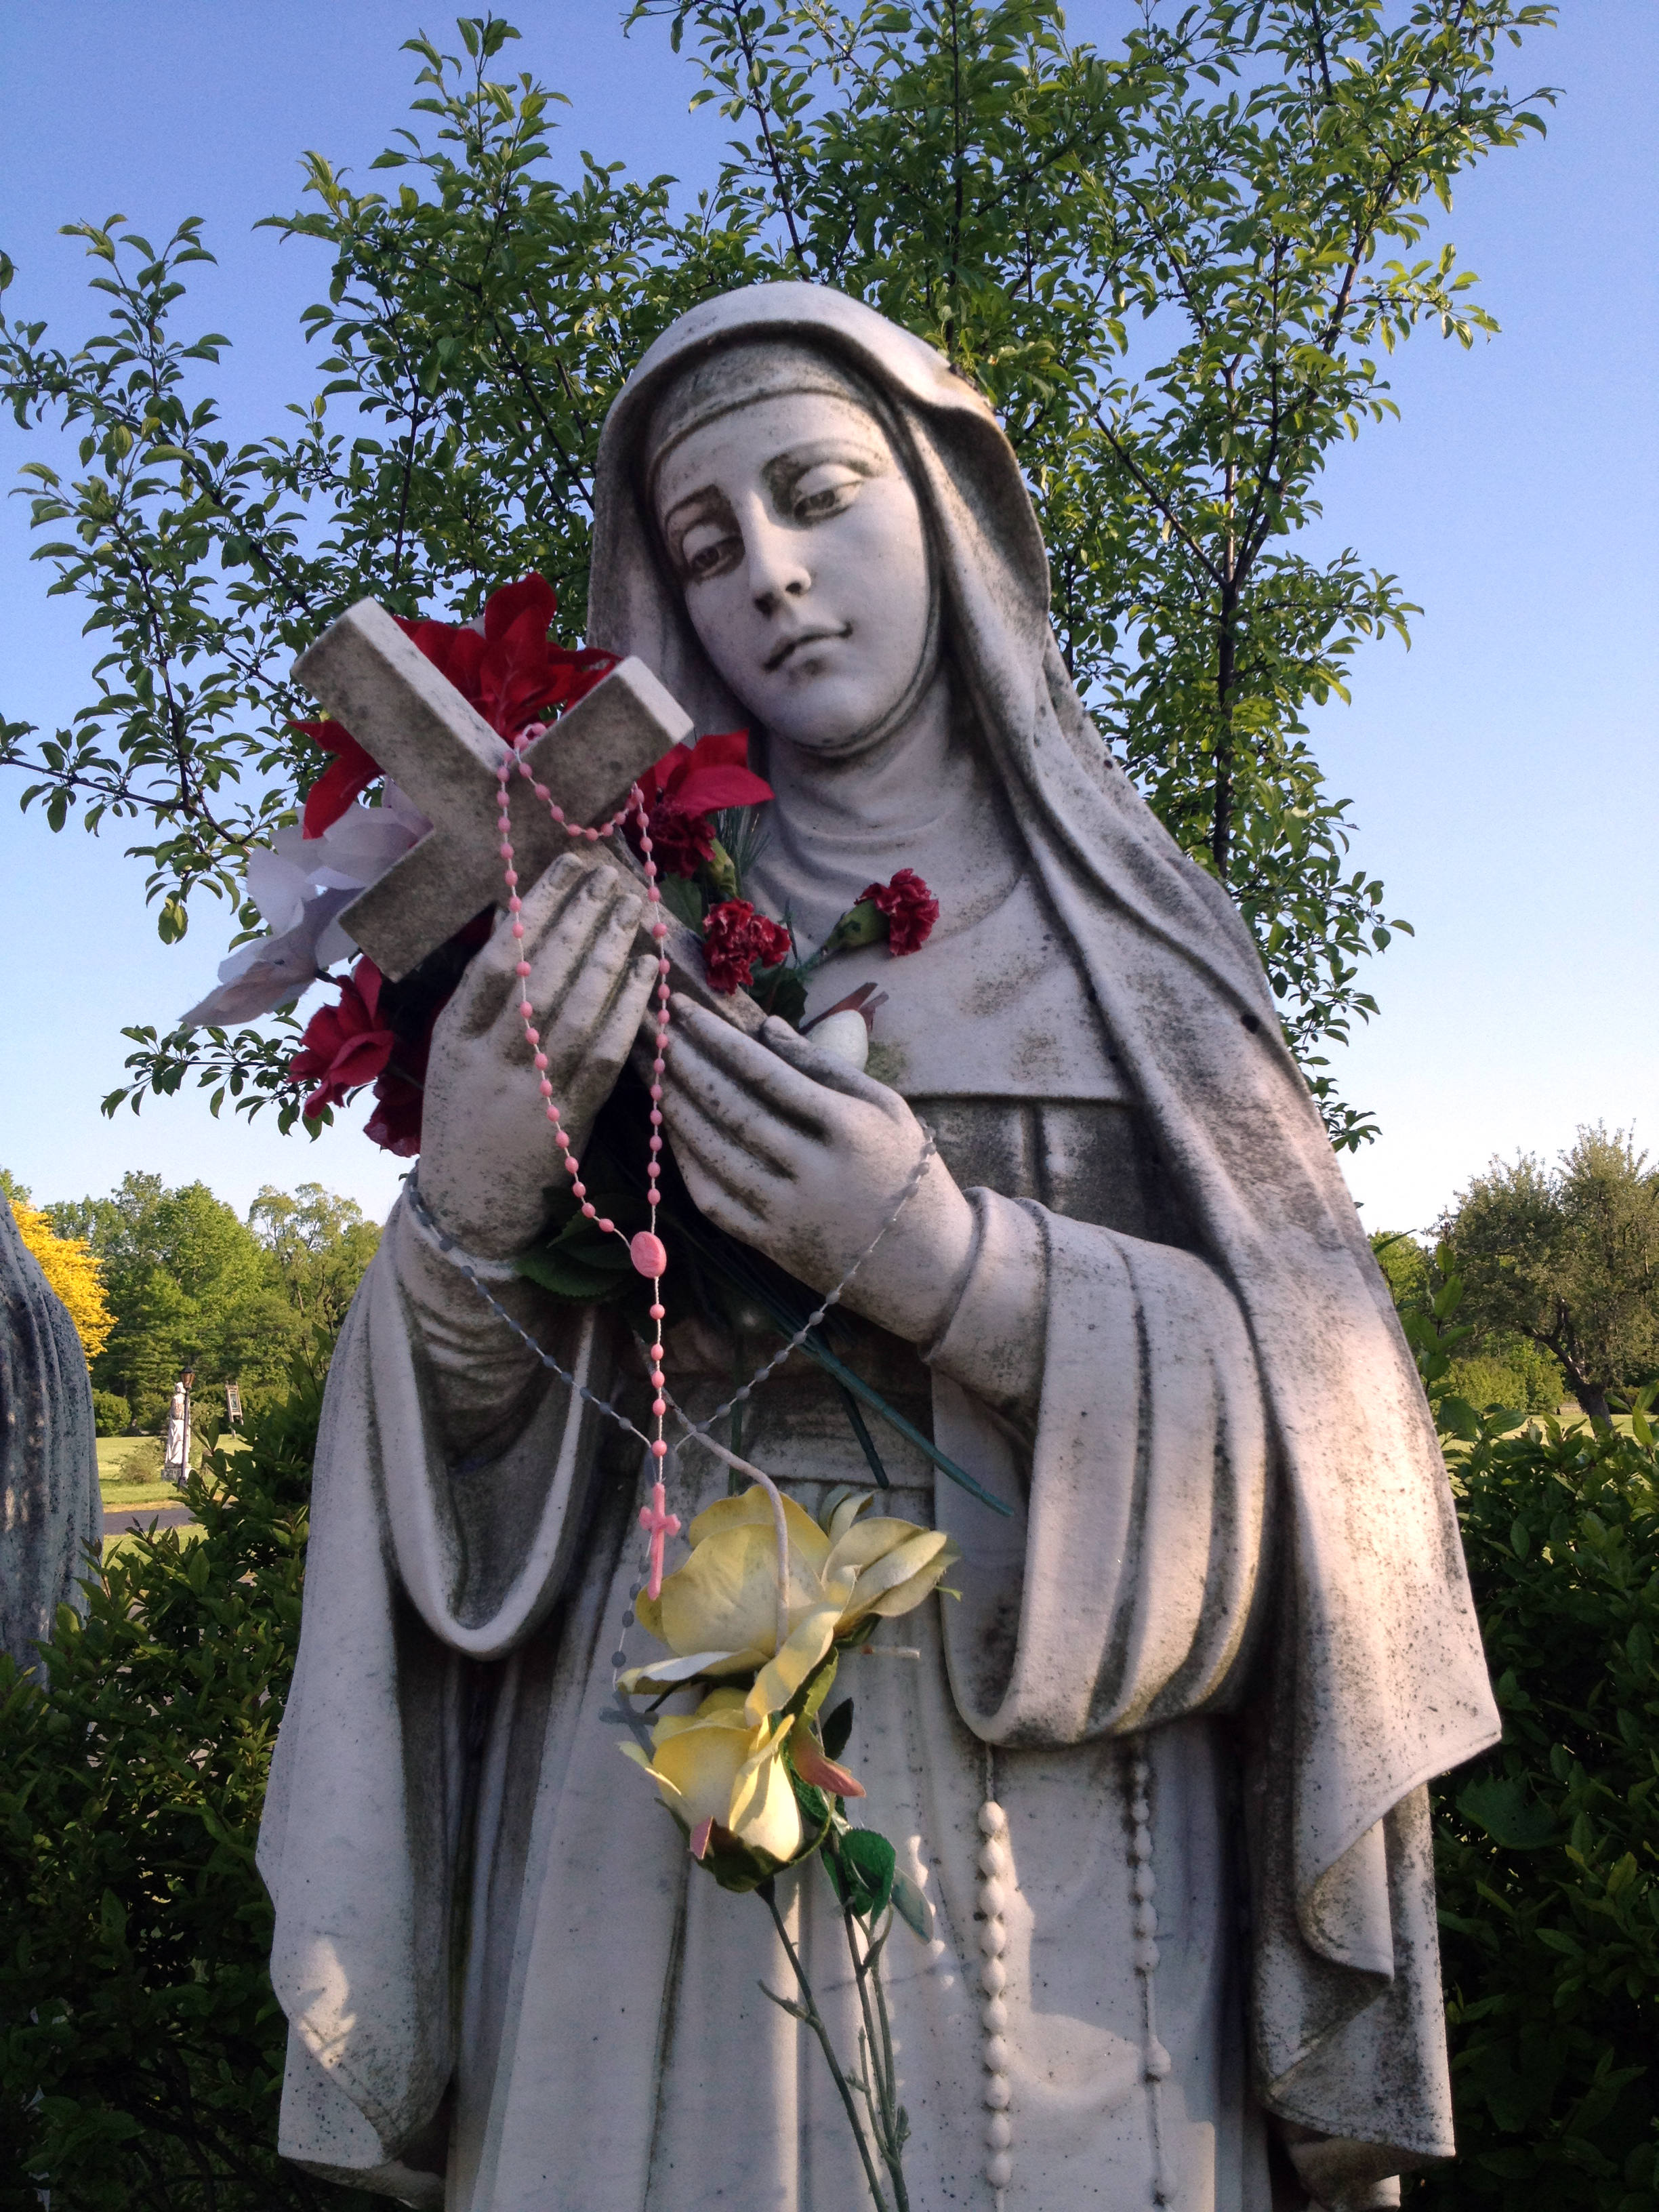 Statue of Saint at the Shrine to Our Lady of Fatima in Lewiston, New York